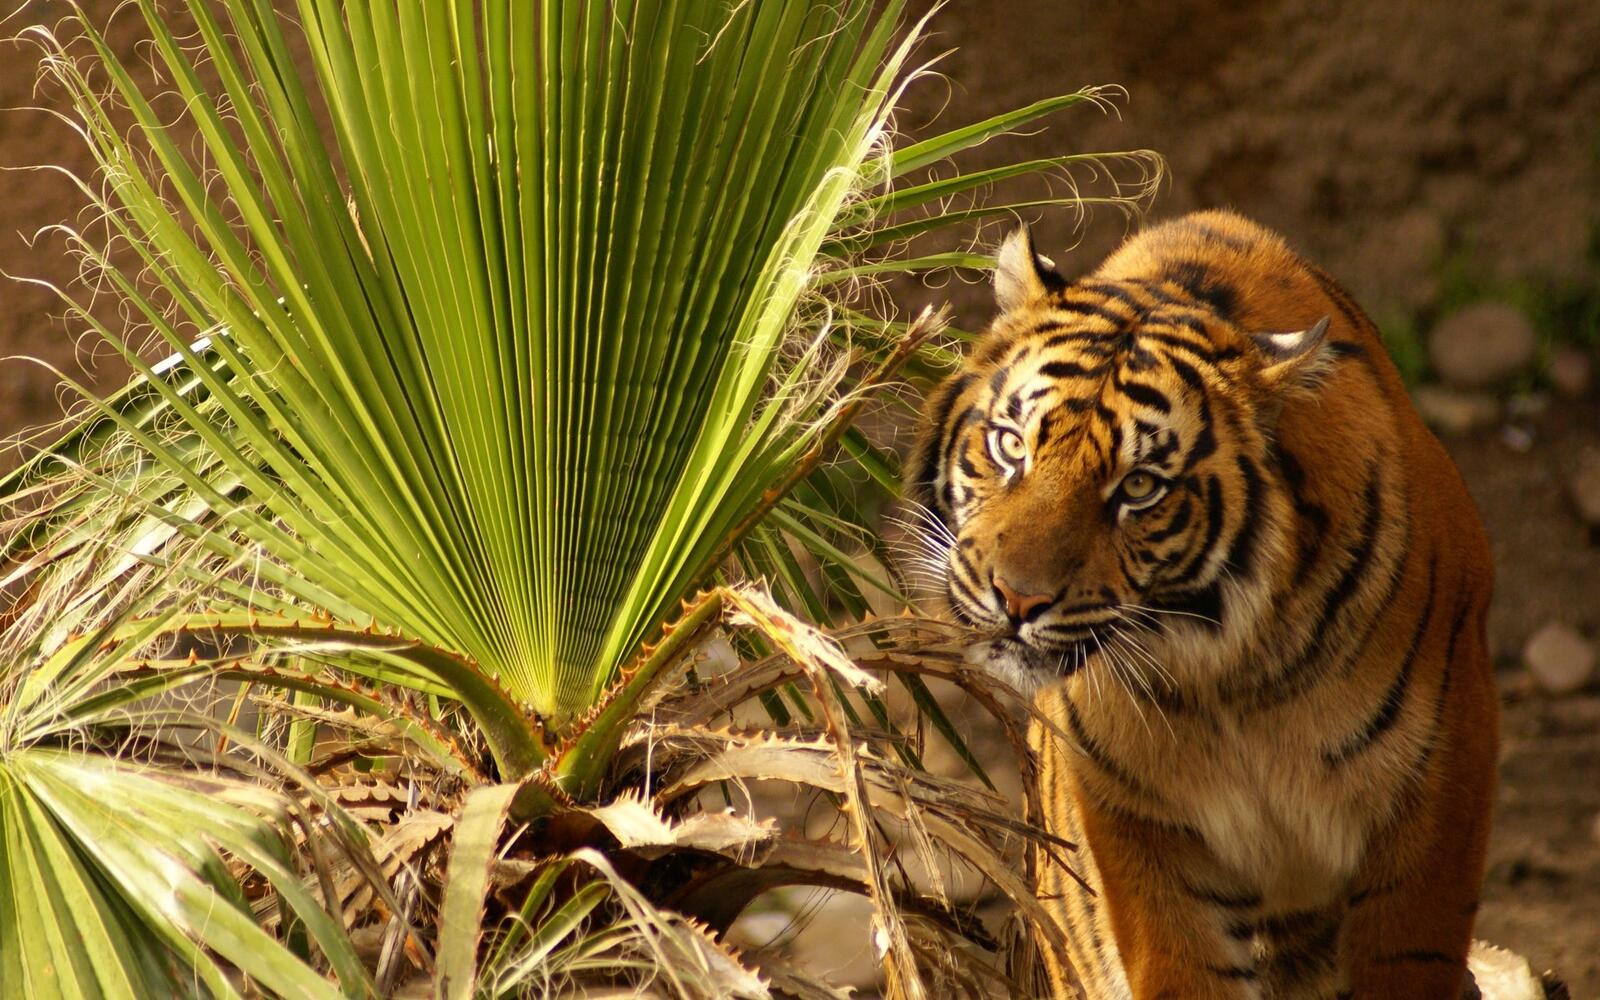 Wallpapers nature grass tiger on the desktop